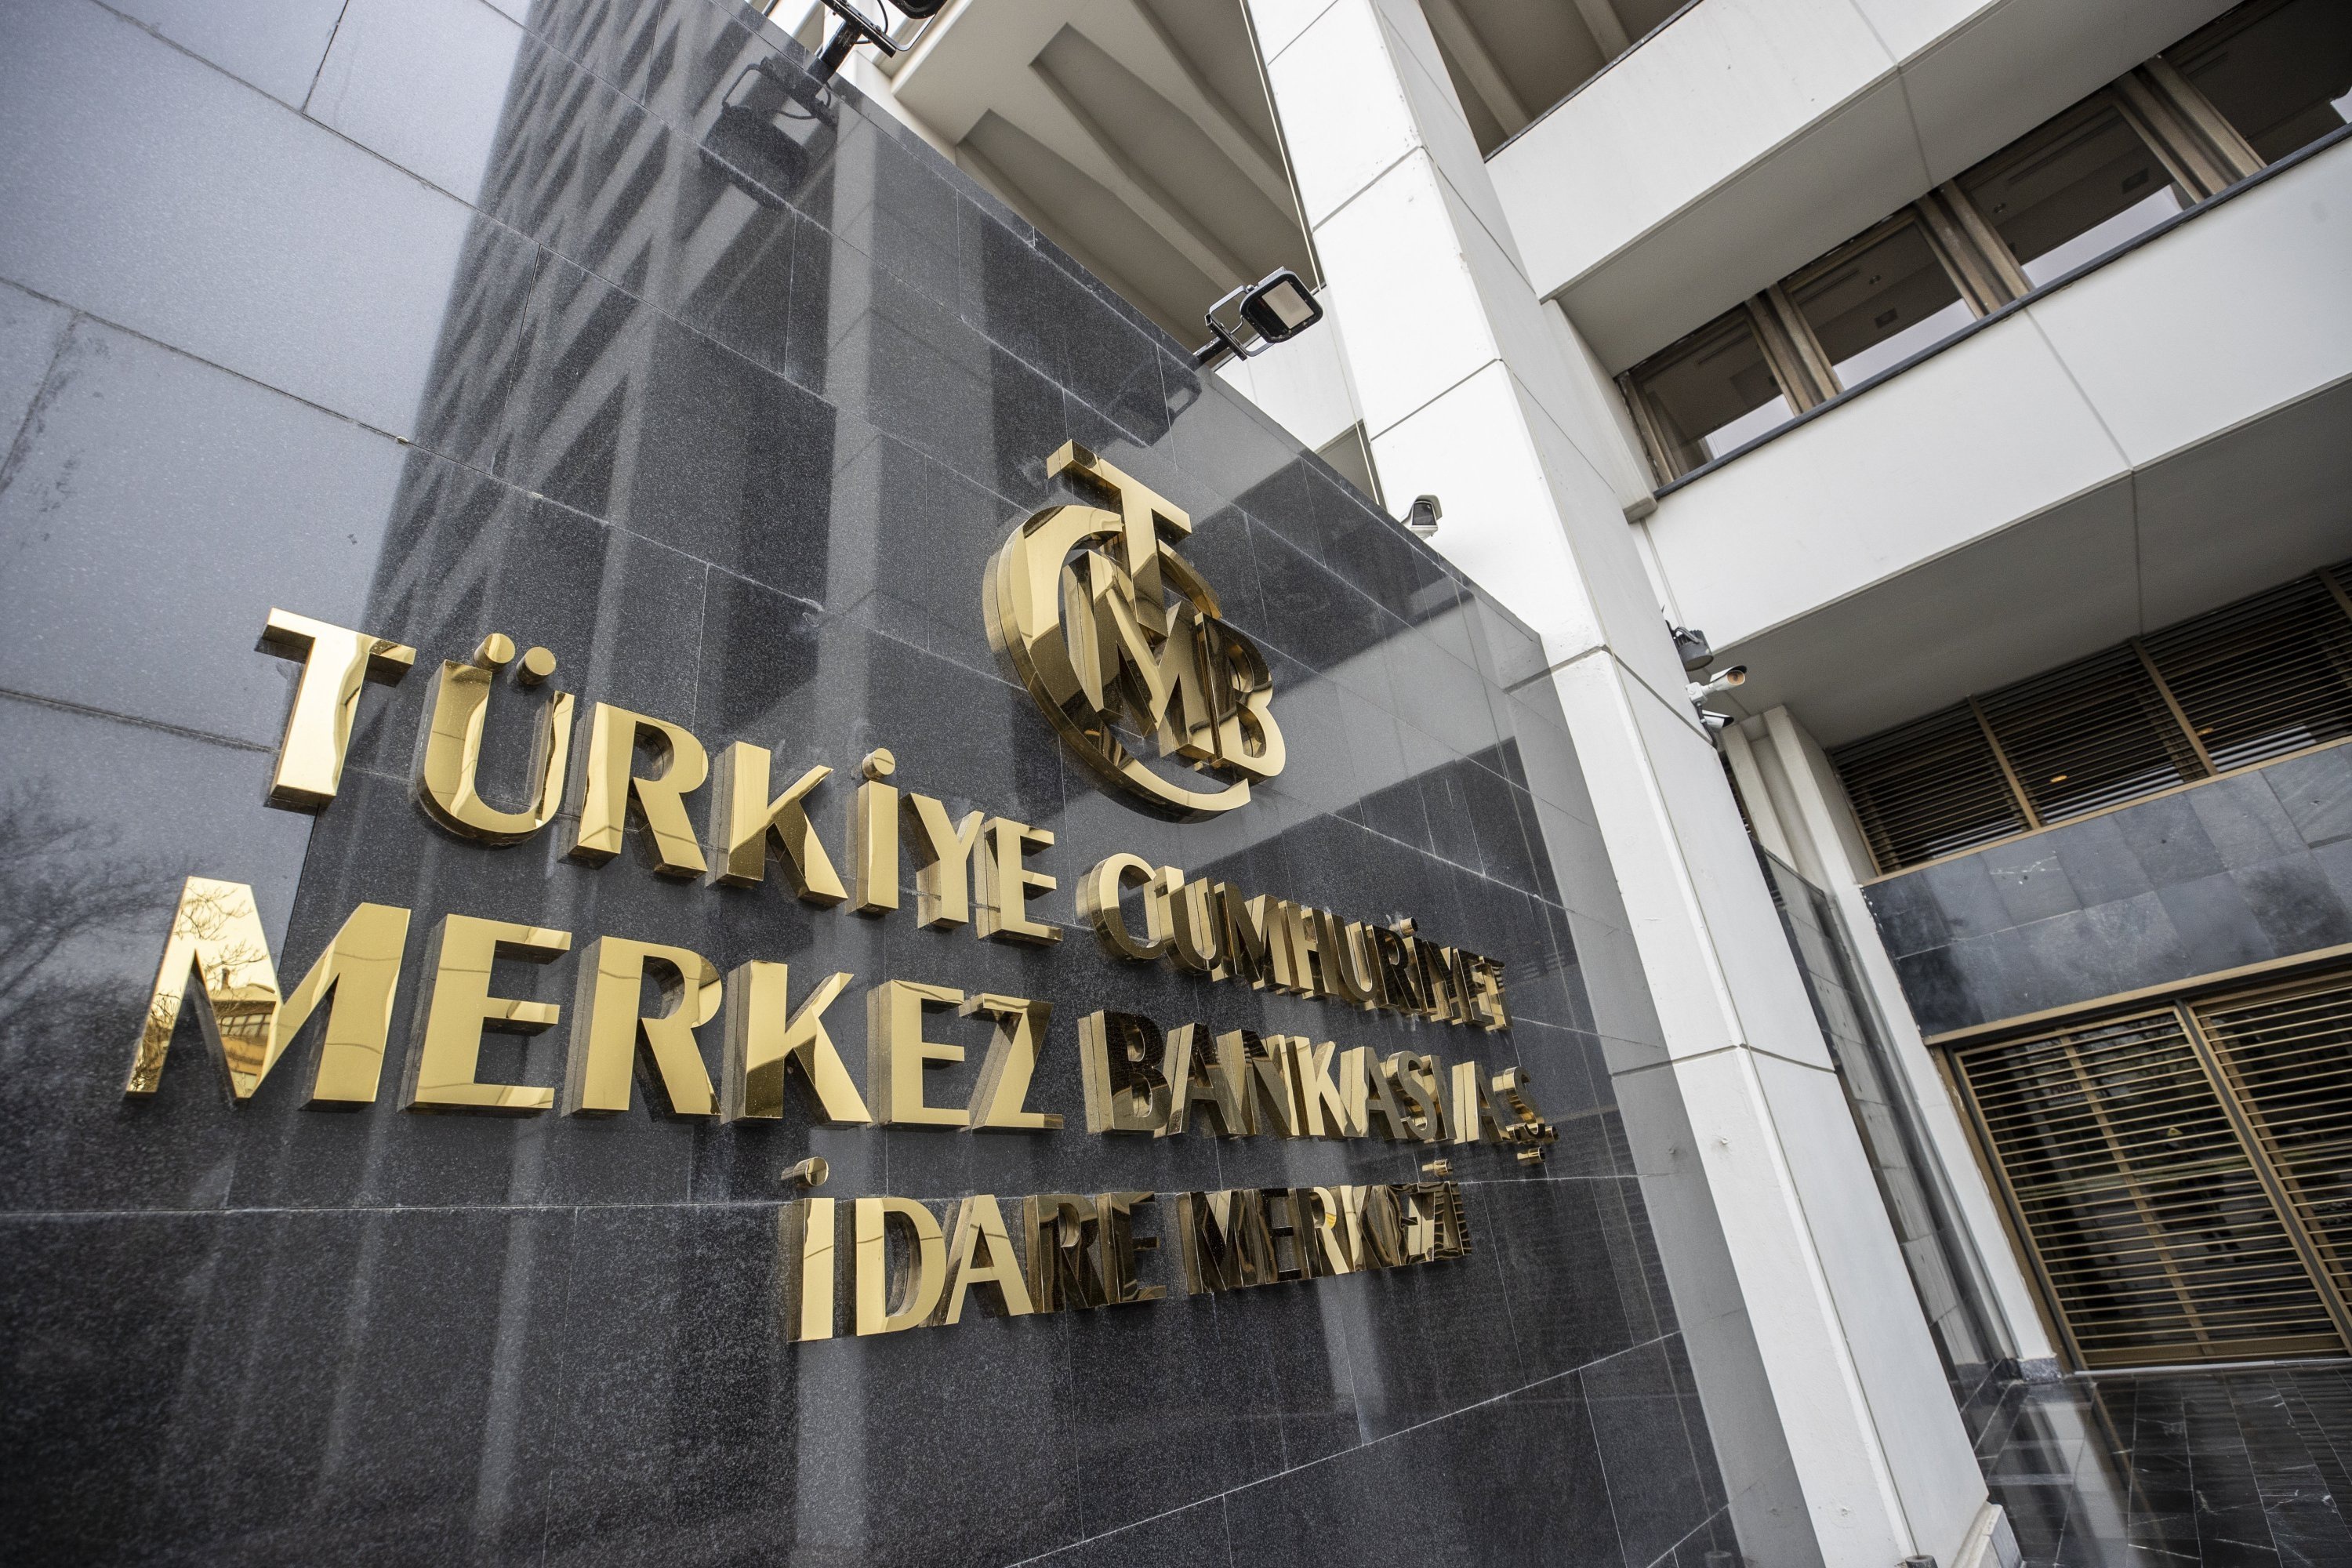 Energy prices climb in Turkey amid highest inflation in dacade